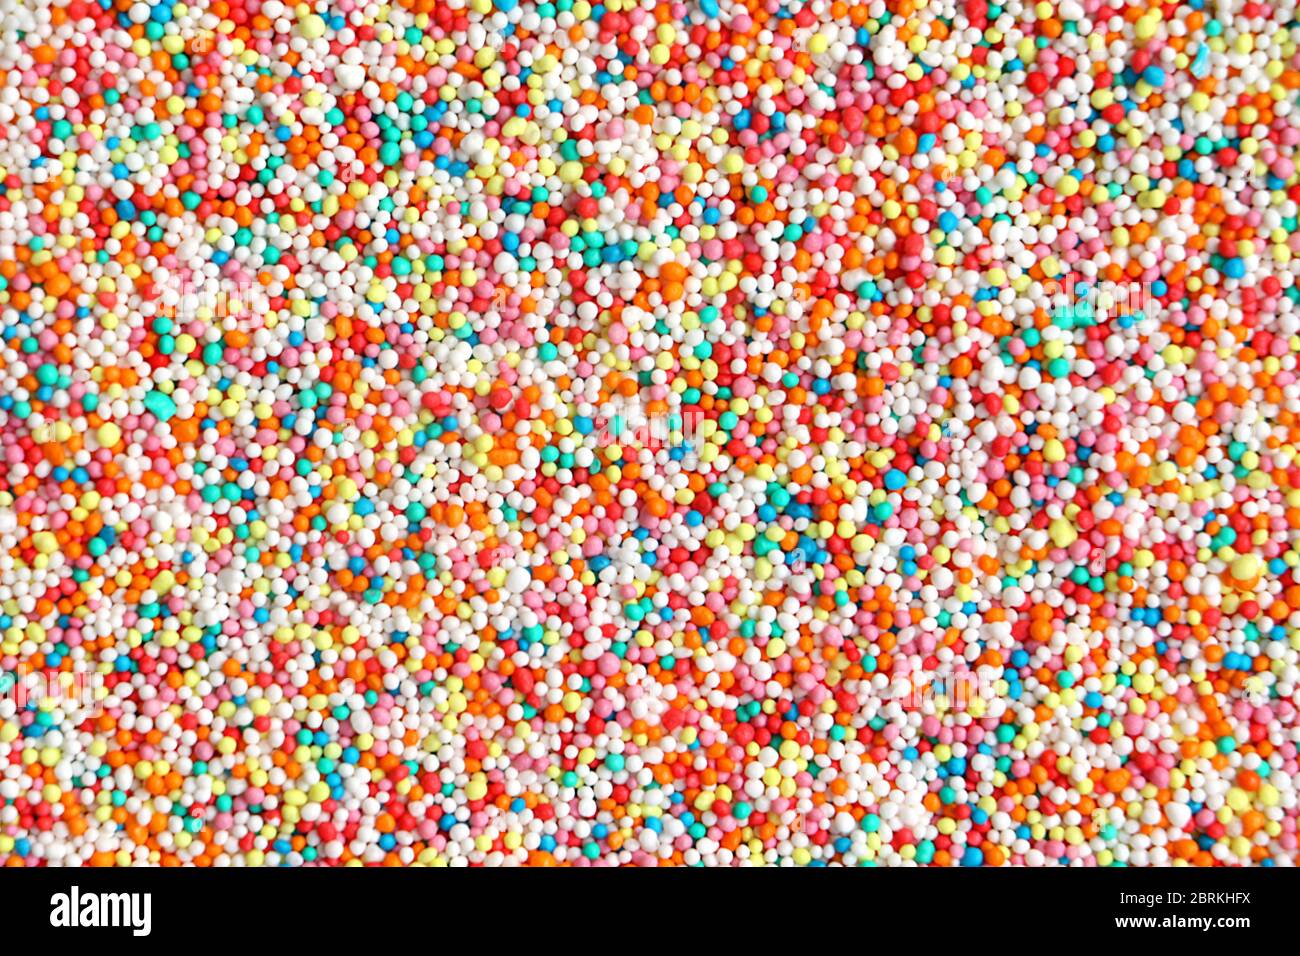 Colorful Hundreds and thousands confectionary isolated on a white background with space for text Stock Photo